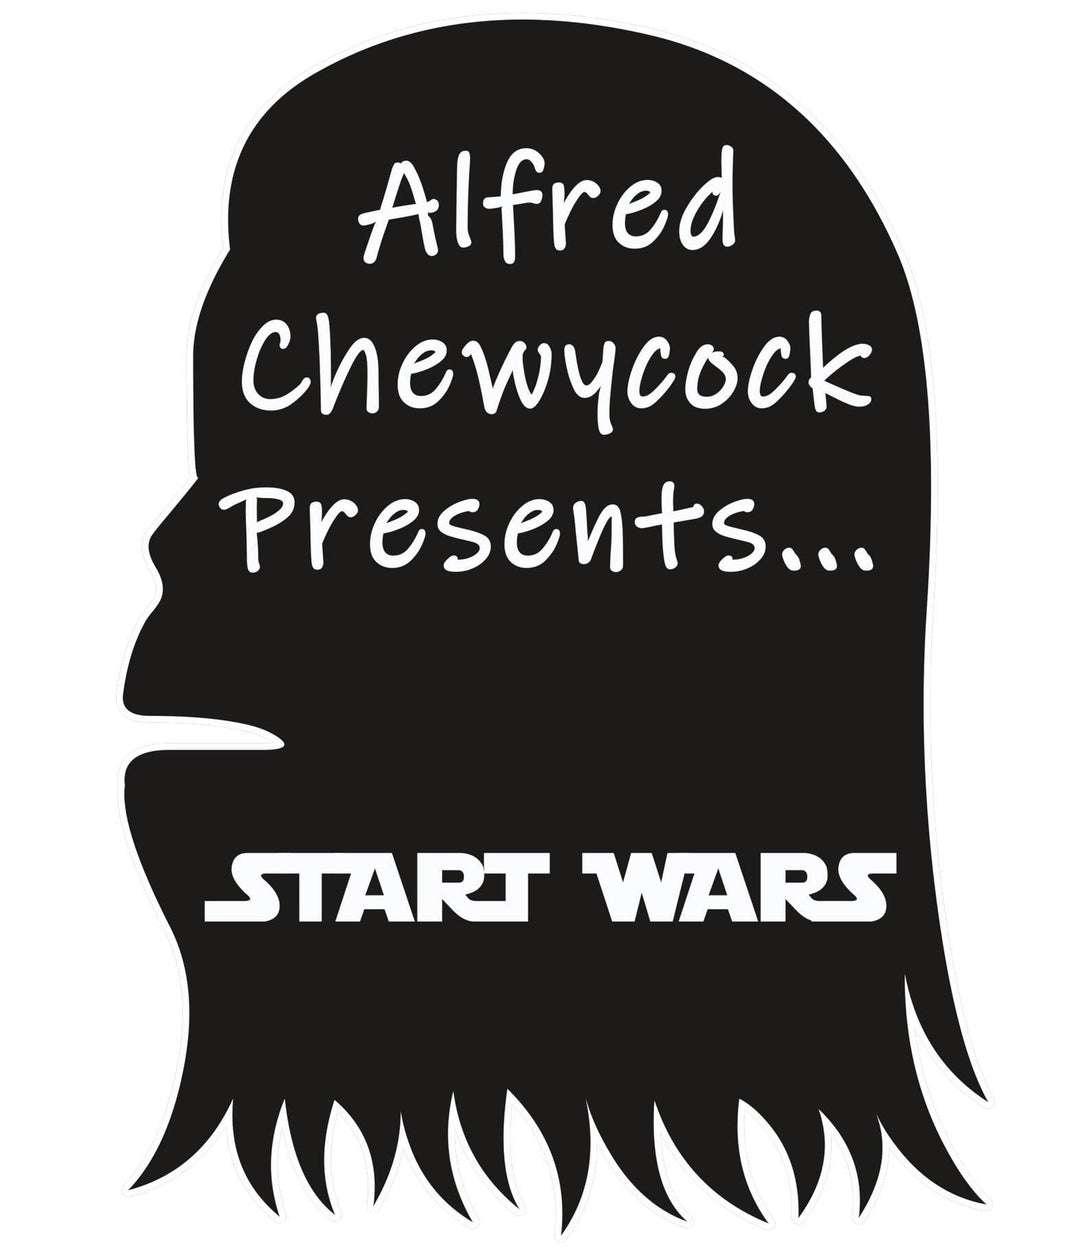 Alfred Chewycock Presents... Start Wars - Long-Sleeve Tee - Witty Twisters T-Shirts